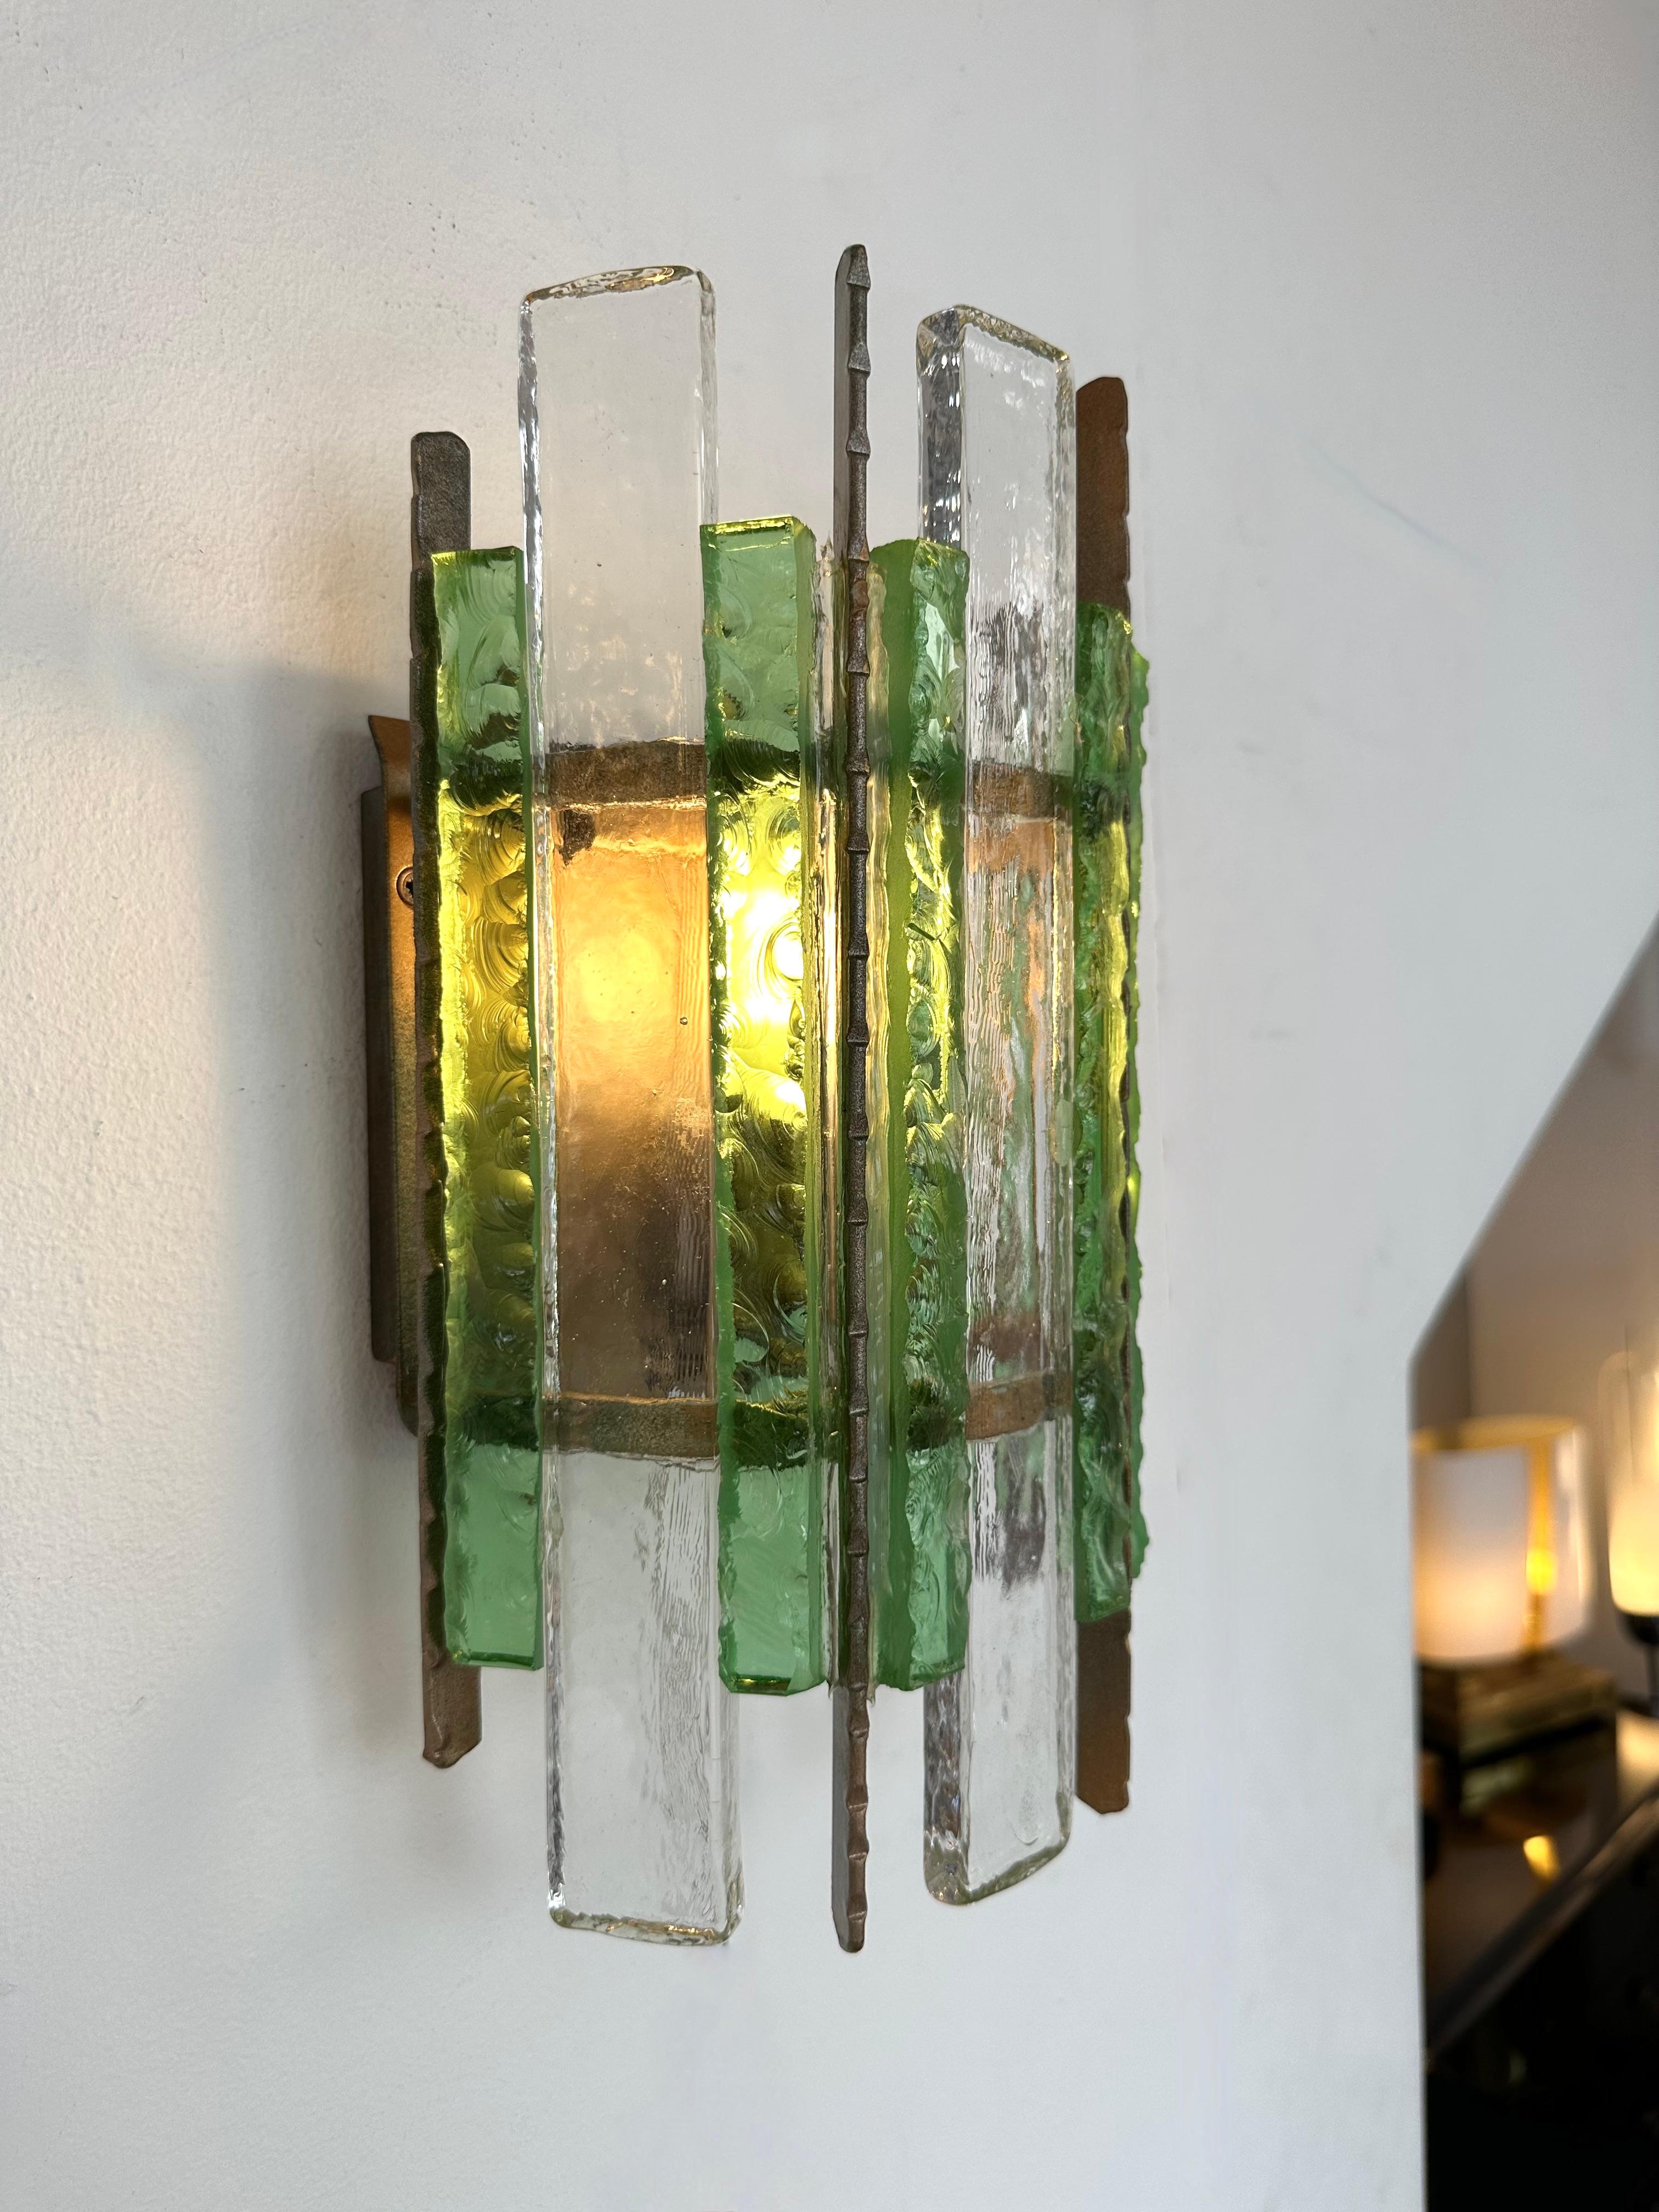 Pair of Hammered Glass Wrought Iron Sconces by Longobard, Italy, 1970s For Sale 5